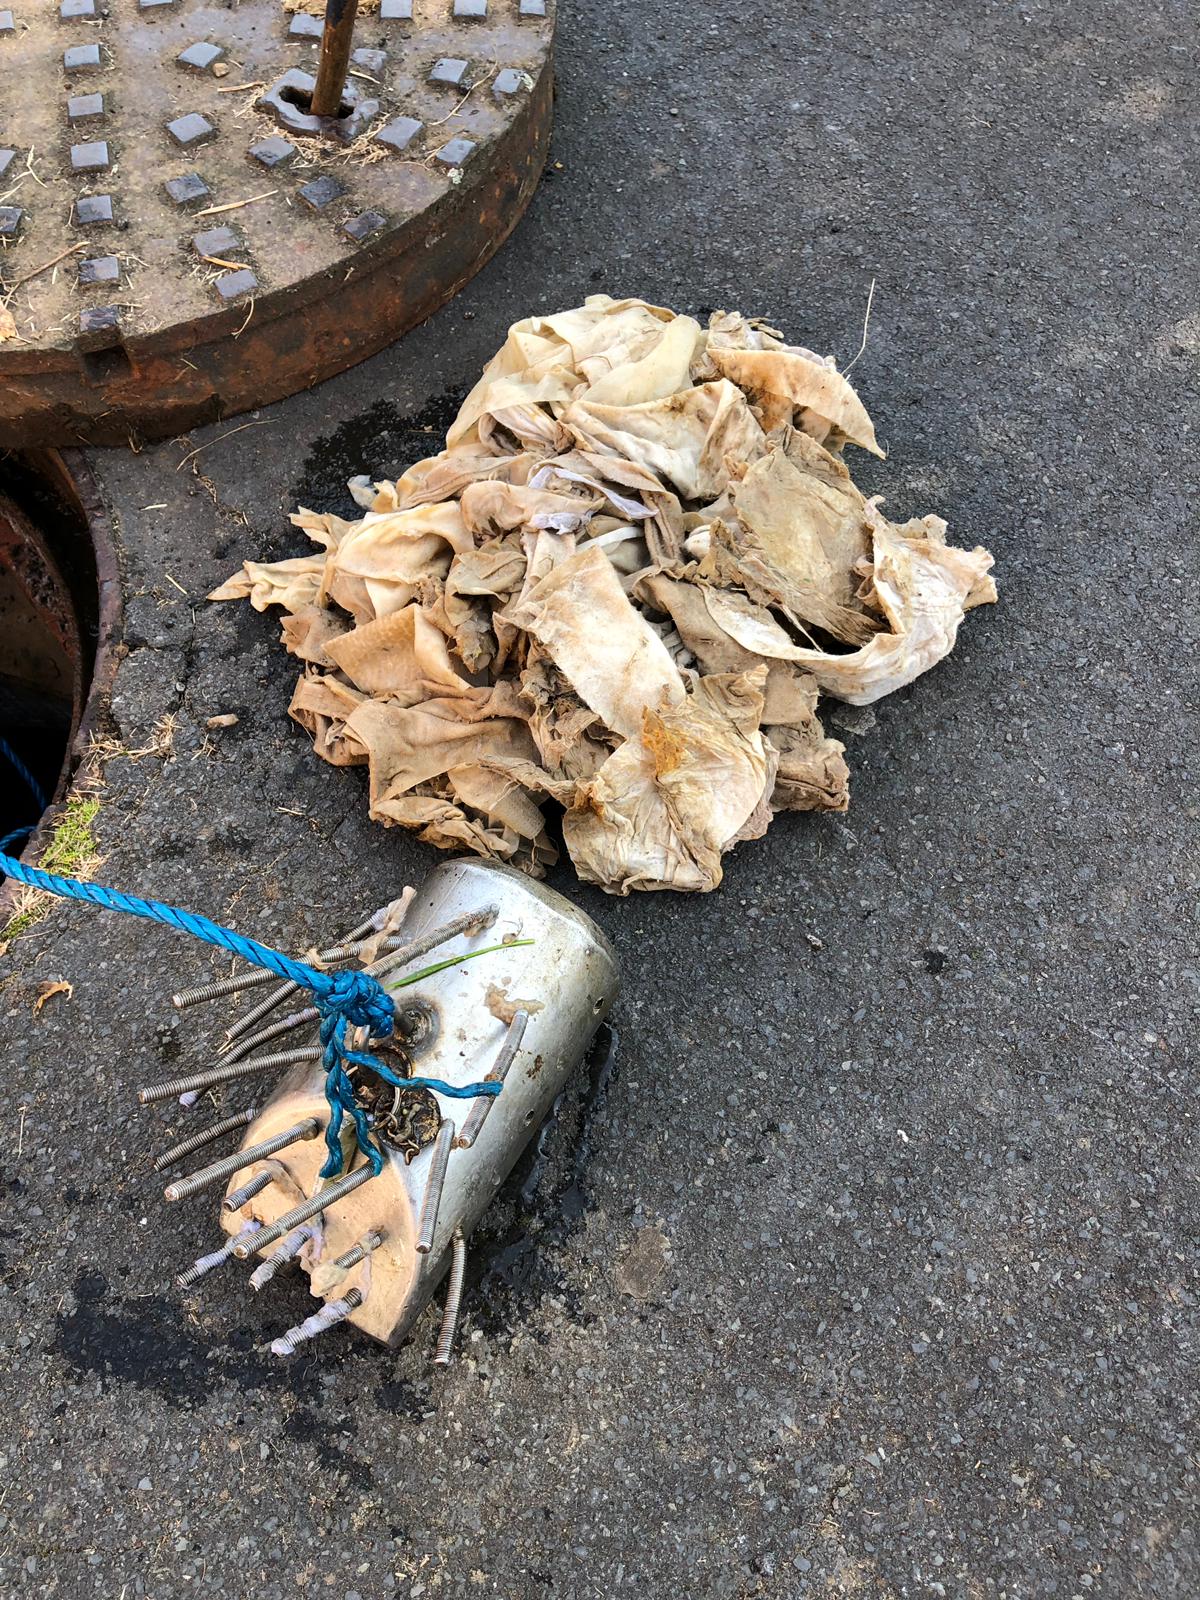 A photo of a cylindrical metal tool with a series of spikes, next to a pile of discoloured wet wipes and an open sewer grate.